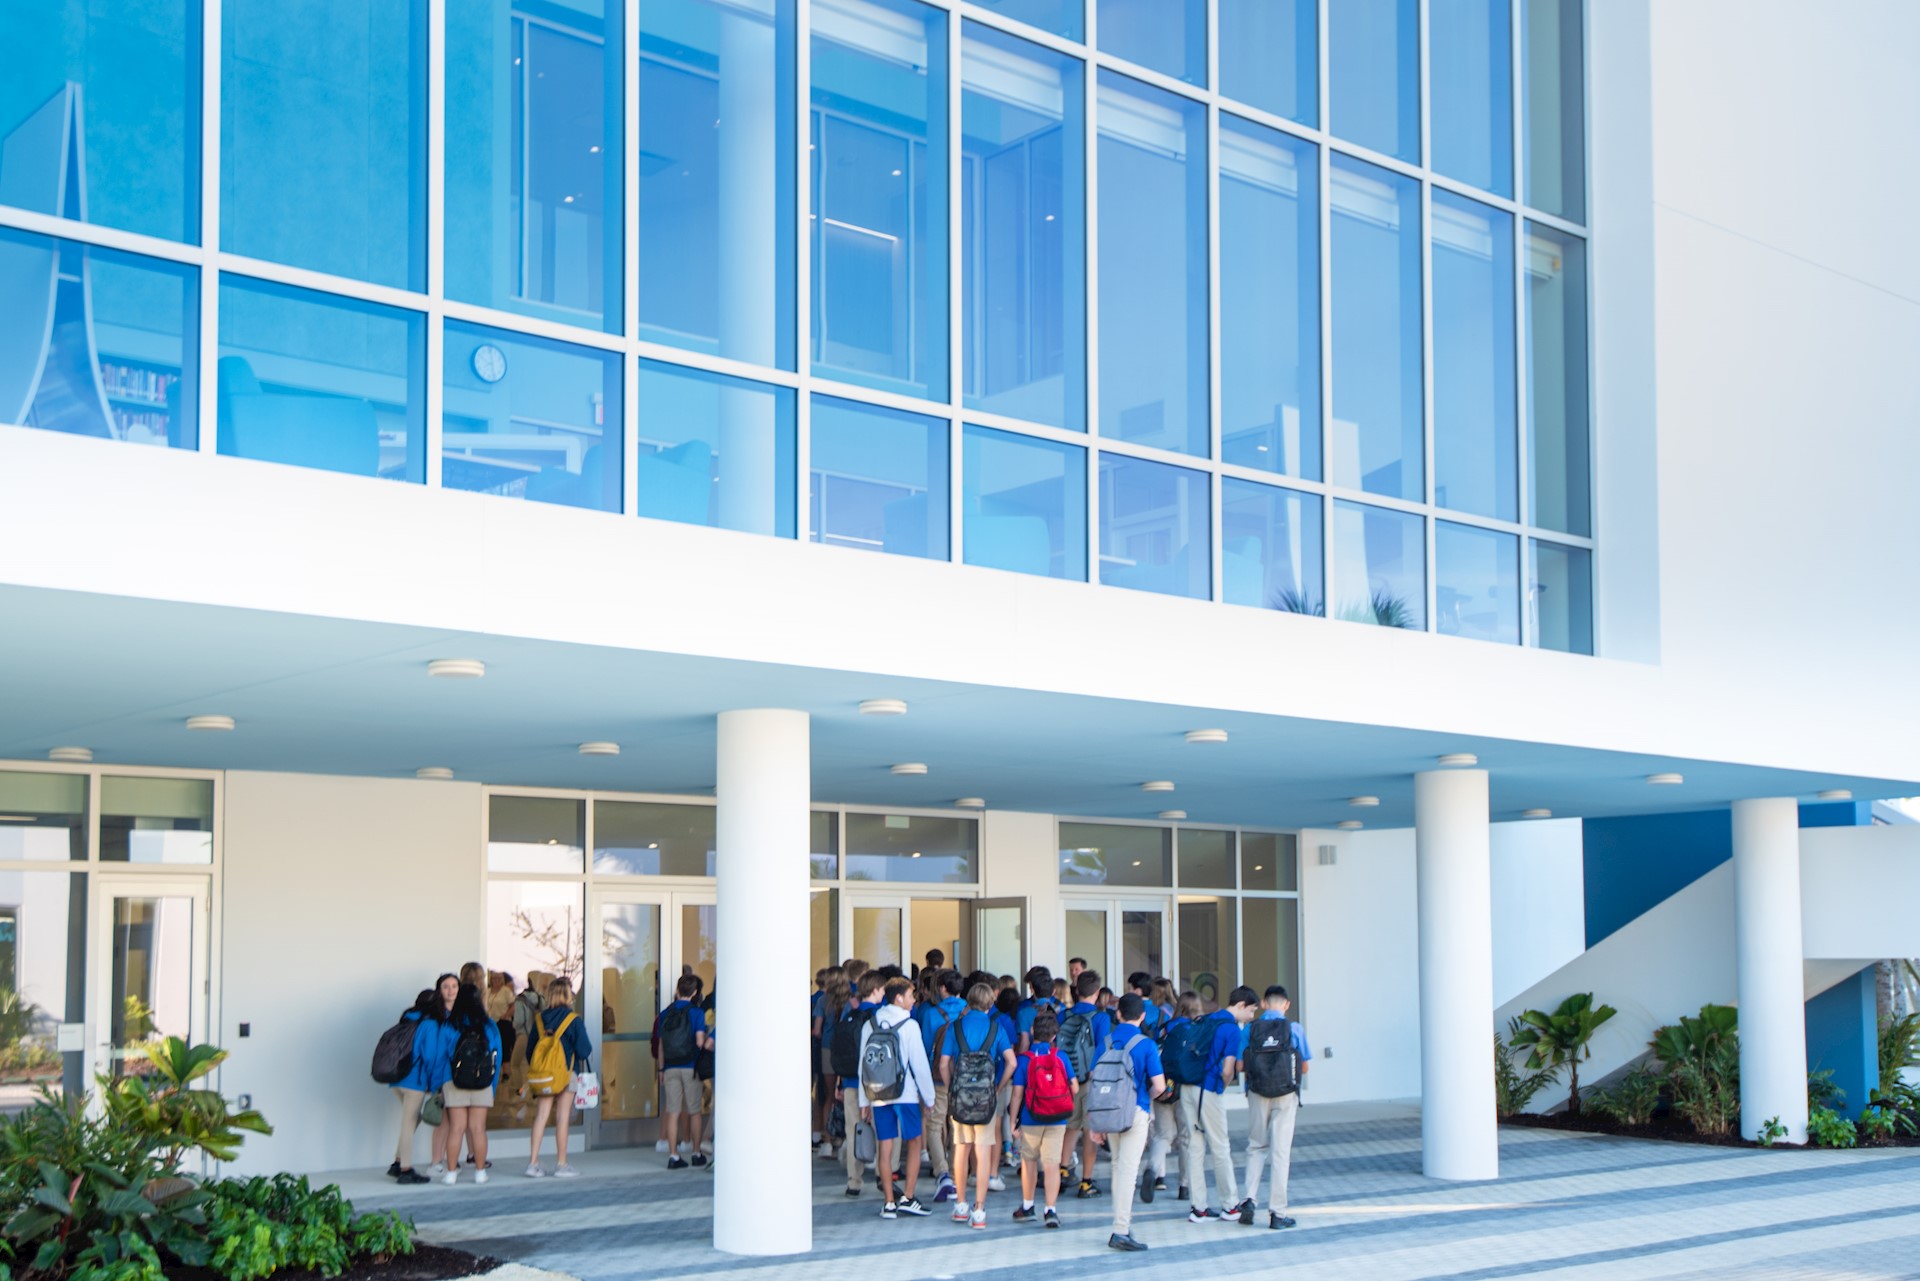 Relocating and choosing the right school in the Cayman Islands